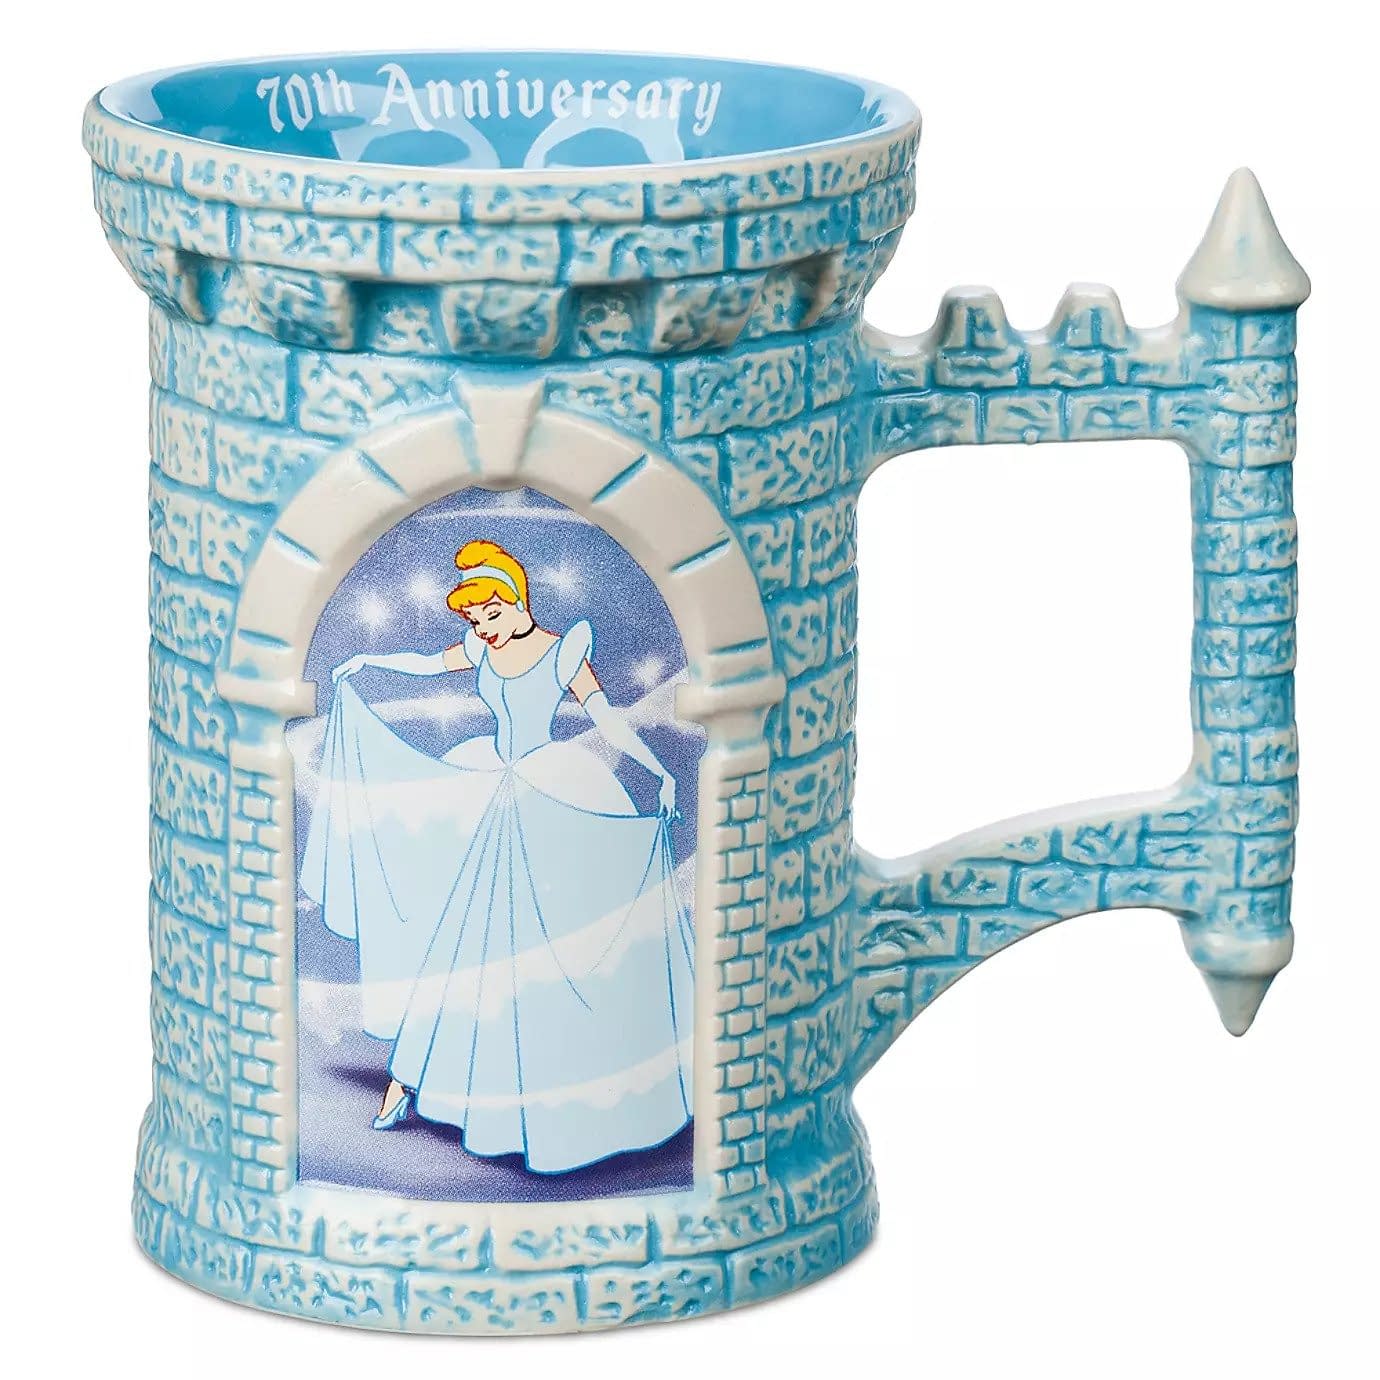 Celebrate Cinderella's 70th at home with these magical items!